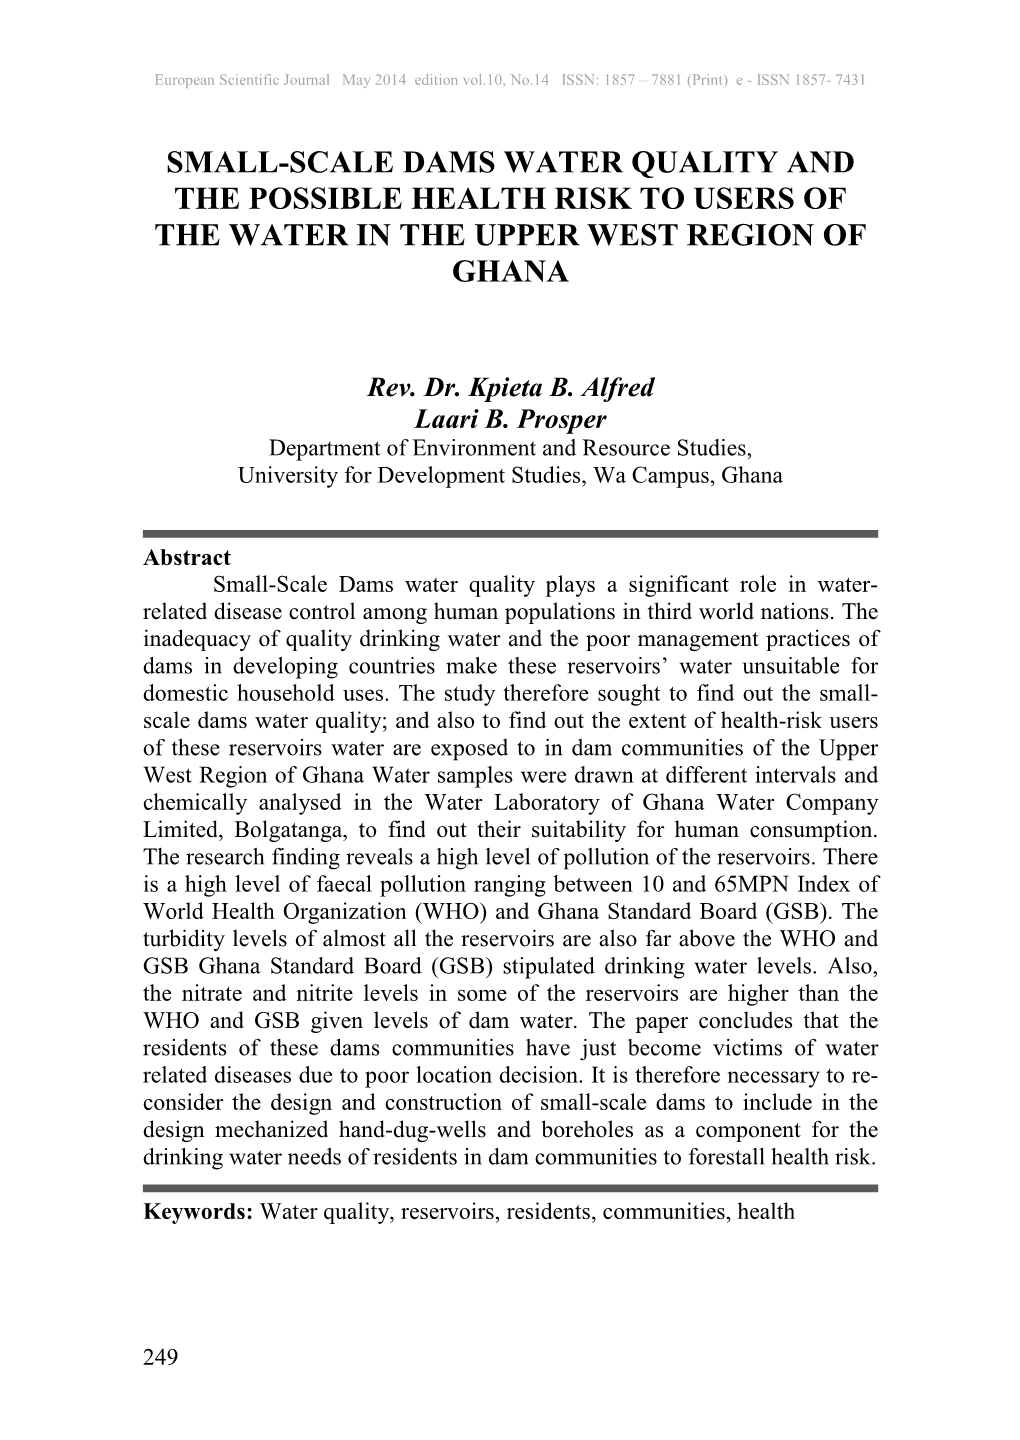 Small-Scale Dams Water Quality and the Possible Health Risk to Users of the Water in the Upper West Region of Ghana